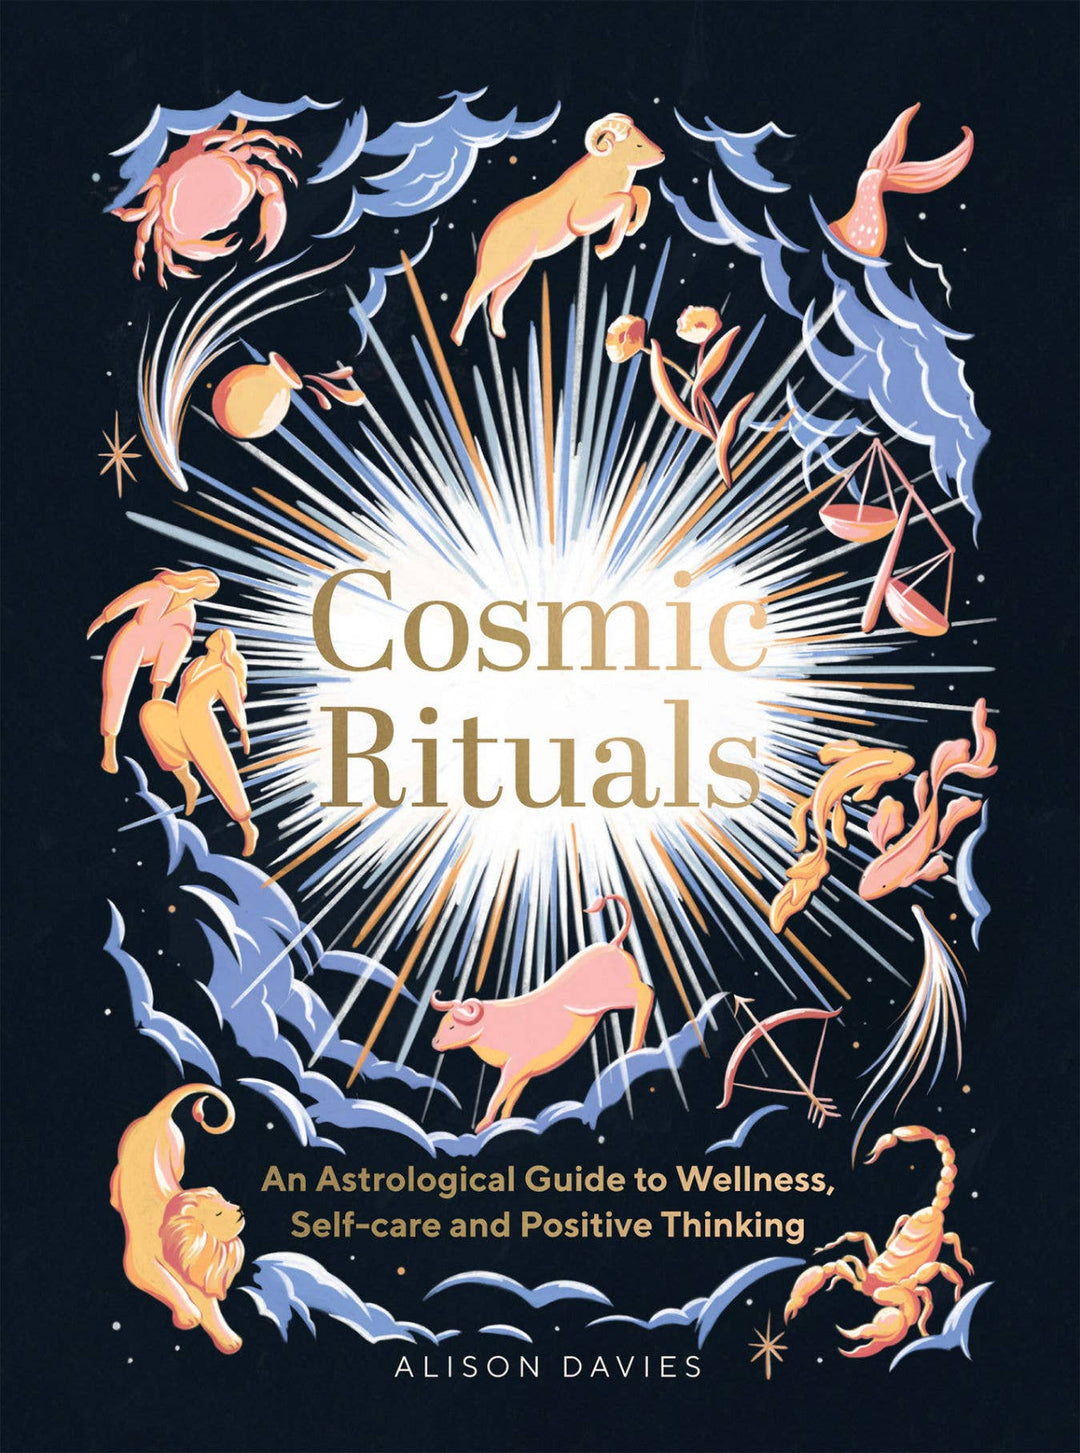 Microcosm Publishing & Distribution - Cosmic Rituals: An Astrological Guide to Wellness